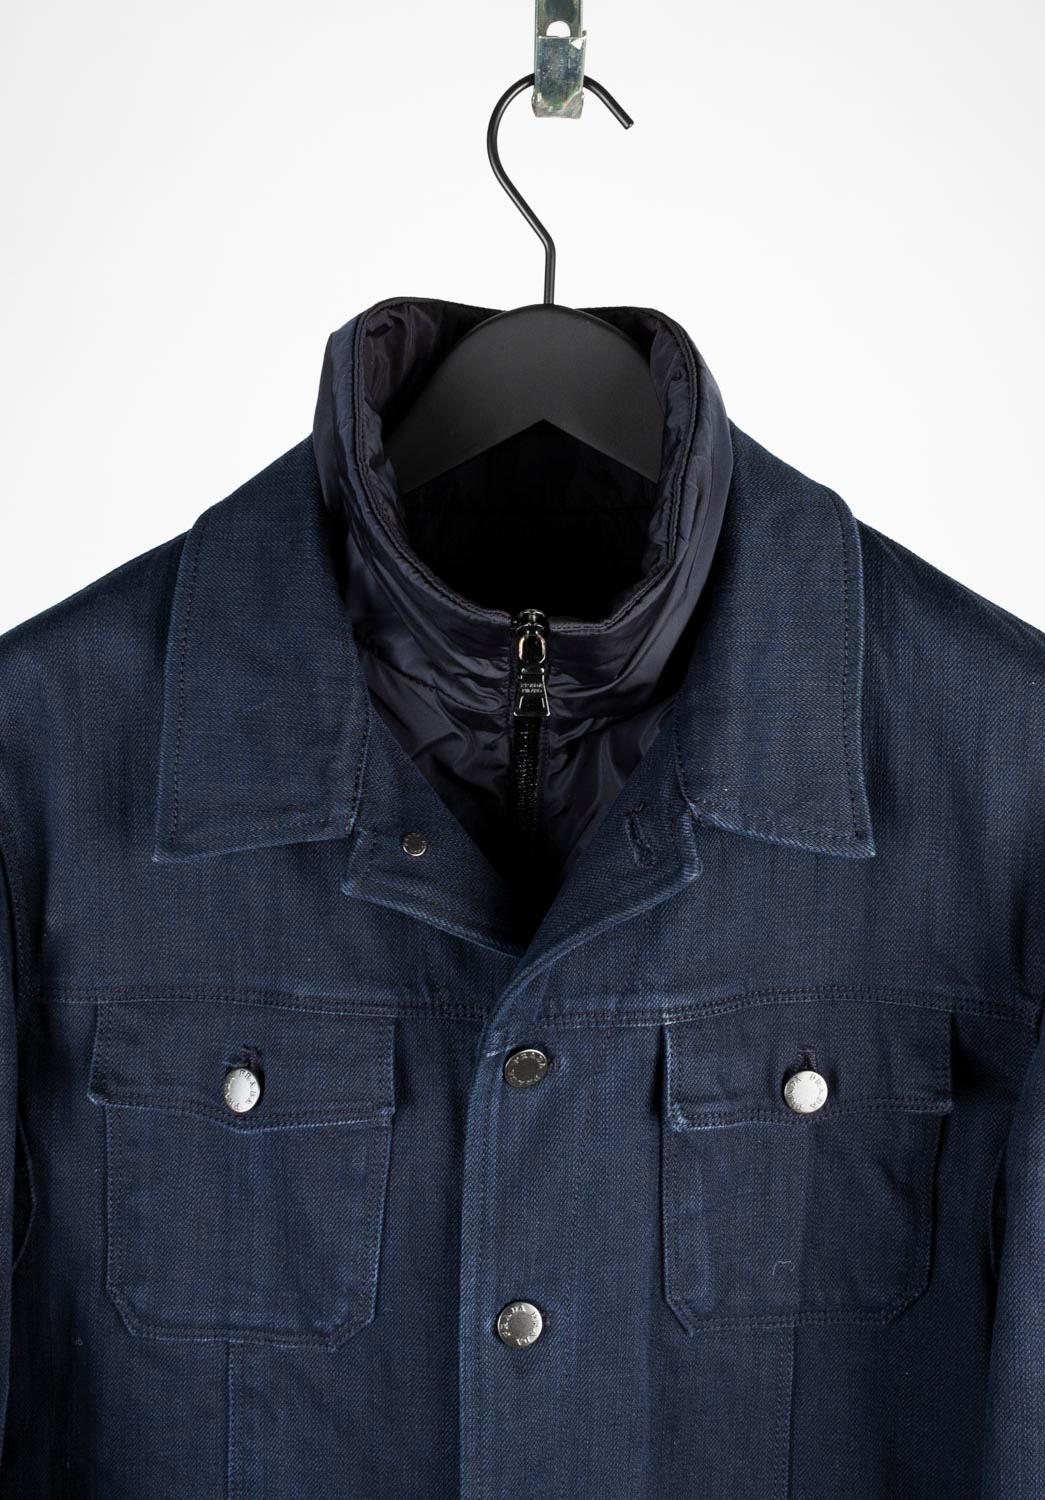 100% genuine Prada Denim Bomber Jacket with linning, S703 
Color: blue
(An actual color may a bit vary due to individual computer screen interpretation)
Material: 100% cotton
Tag size: ITA52 (M/L)
This jacket is great quality item. Rate 9 of 10,